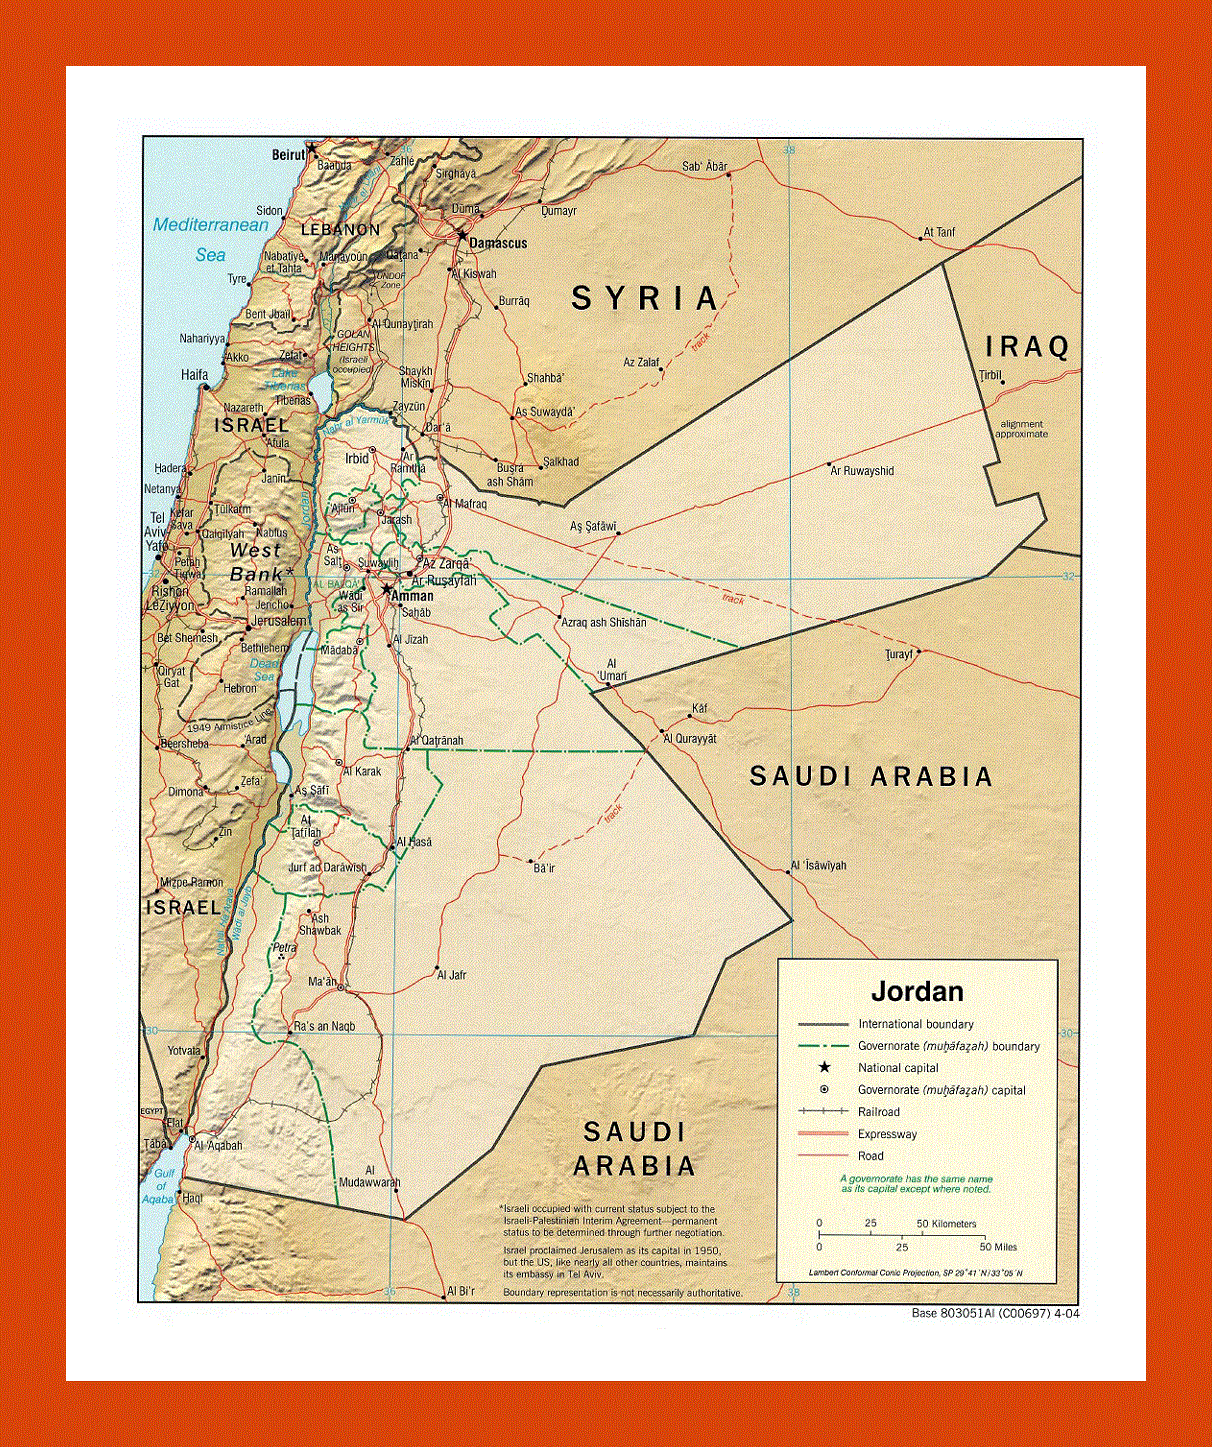 Political and administrative map of Jordan - 2004